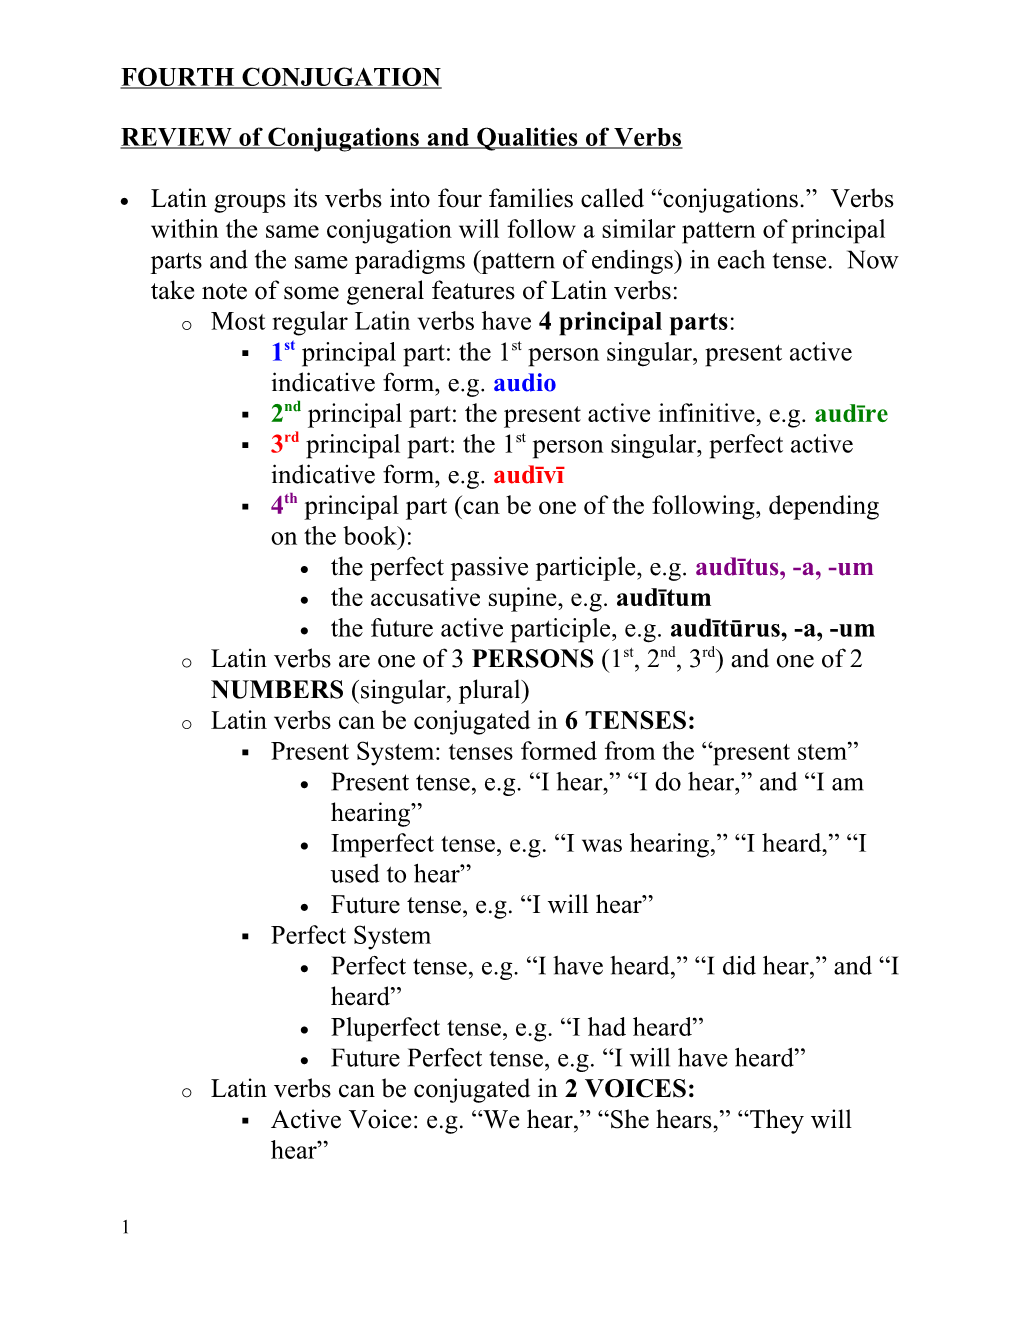 REVIEW of Conjugations and Qualities of Verbs